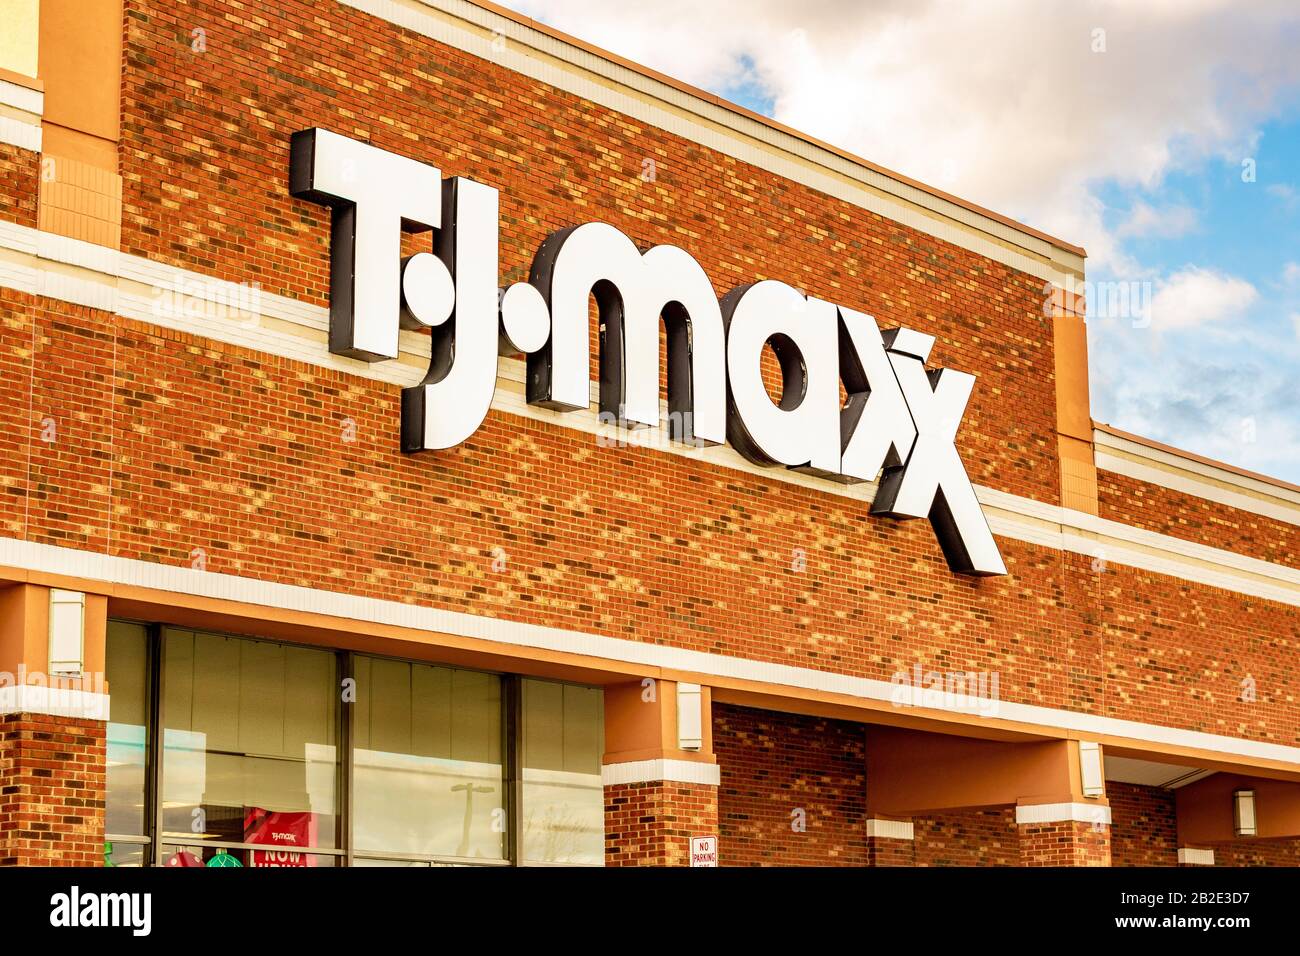 Charlotte, NC/USA - December 14, 2019: Medium horizontal closeup of 'T.J. Maxx' store facade showing brand in bold white letters on a brick building. Stock Photo